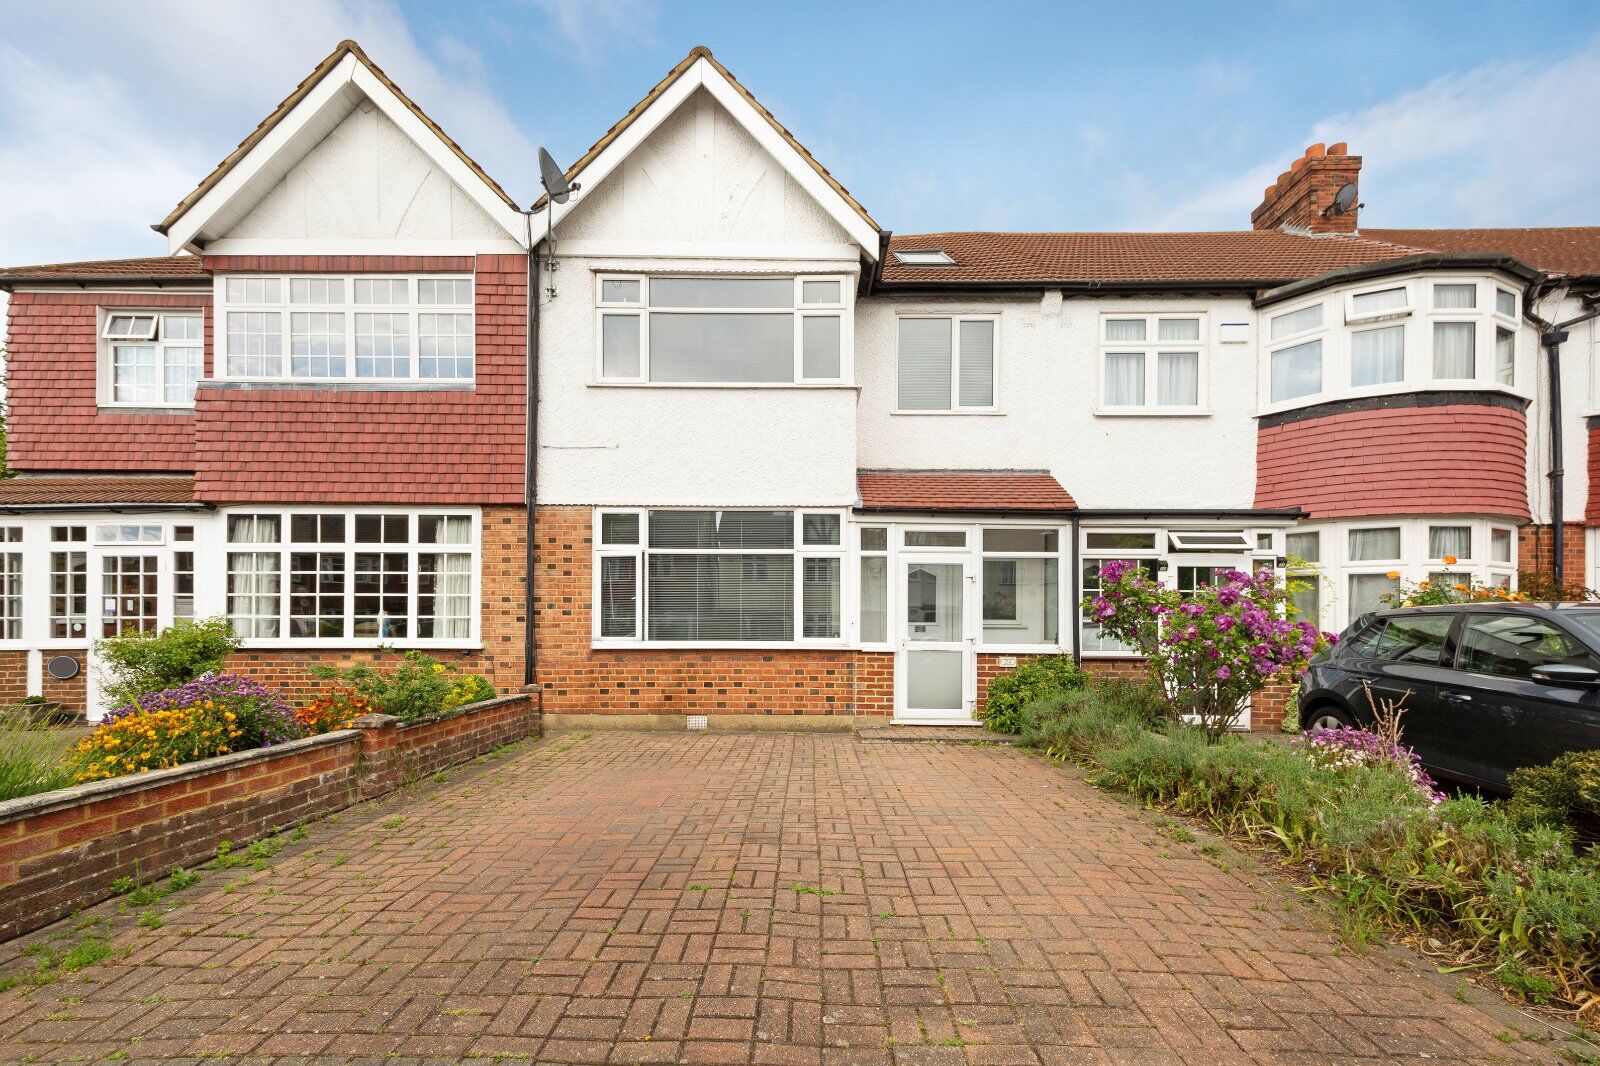 4 bedroom mid terraced house for sale Aylward Road, Wimbledon, SW20, main image